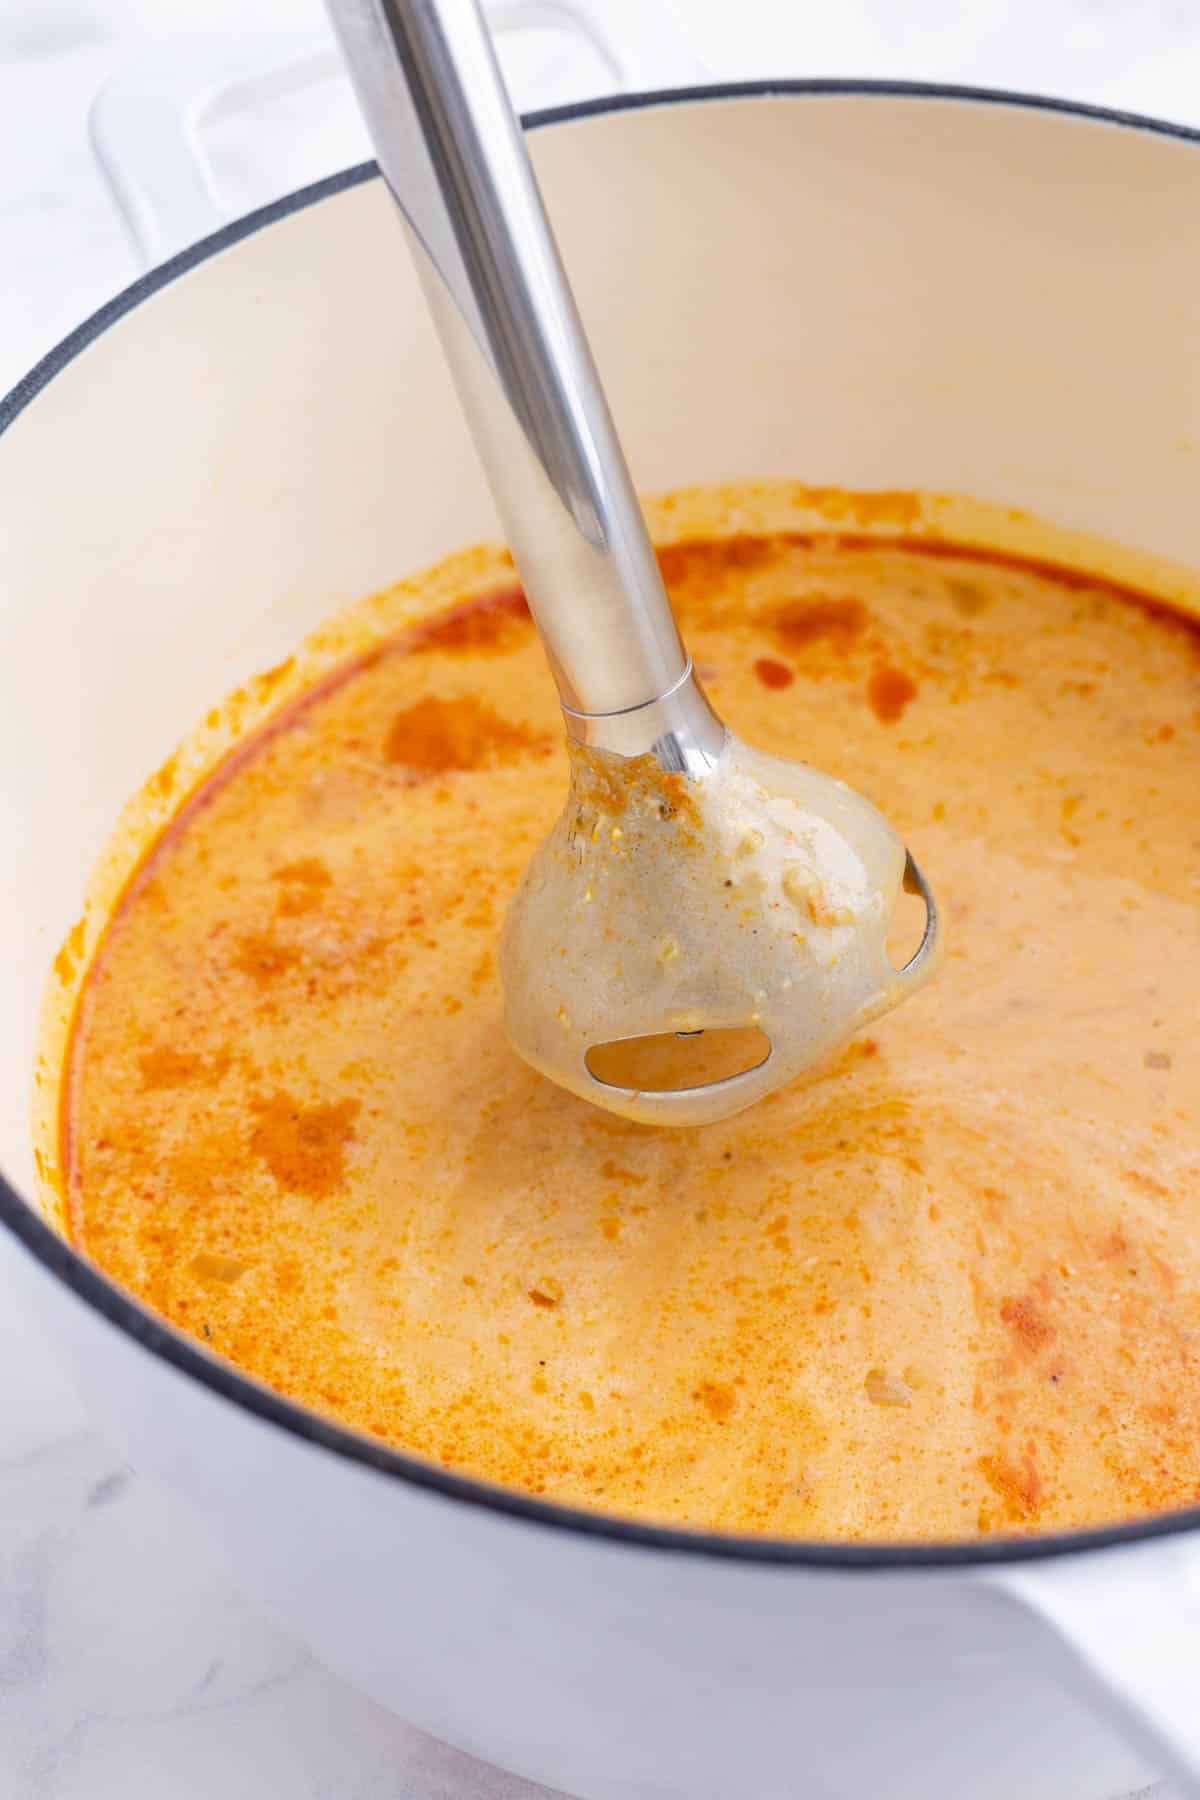 An immersion blender purees the ingredients.